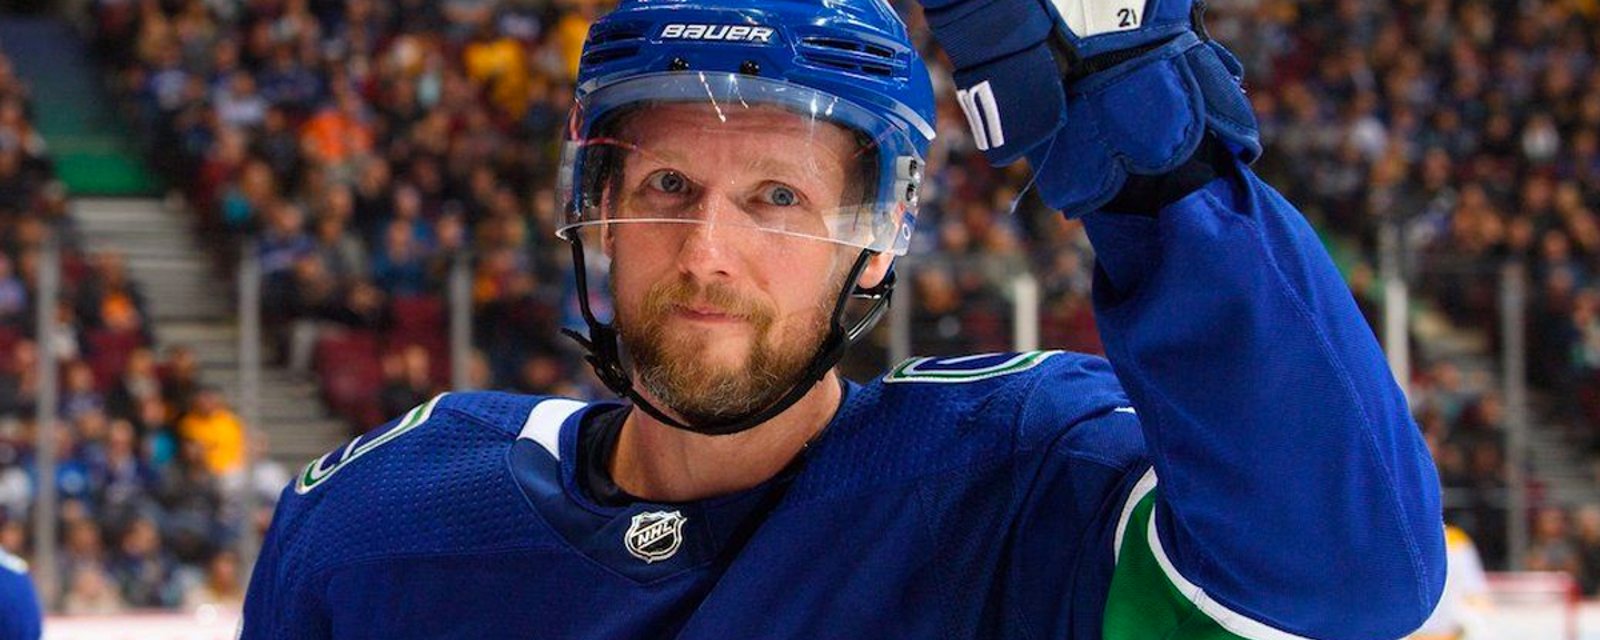 Breaking: Edler officially takes himself off the free agent market